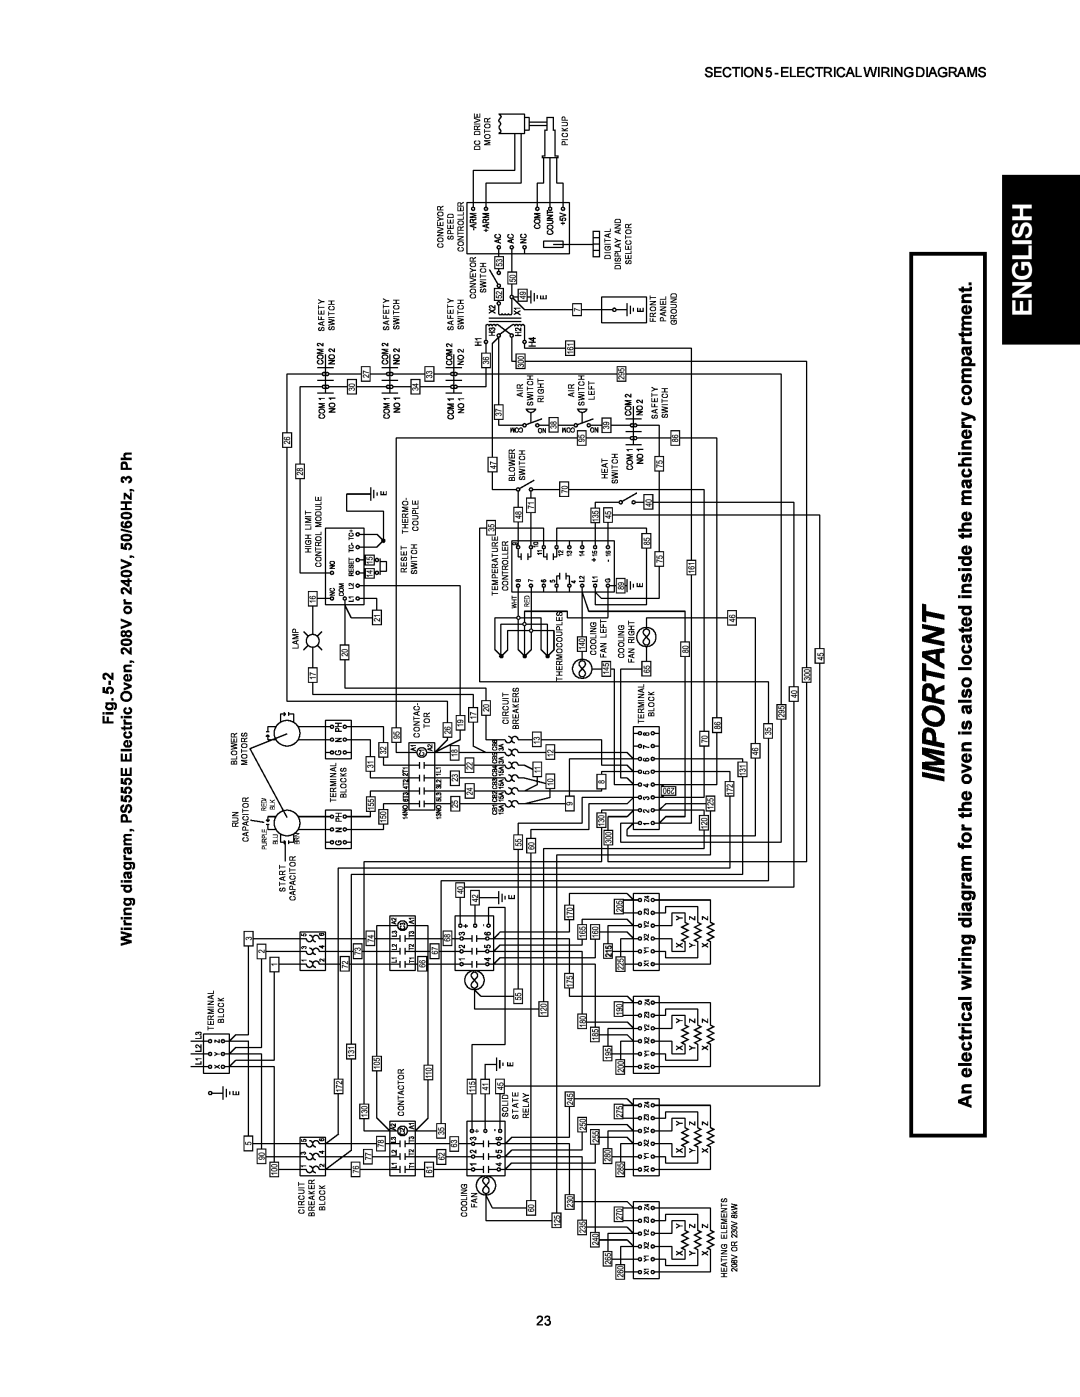 Middleby Marshall PS555G GAS installation manual English, Electricalwiringdiagrams 